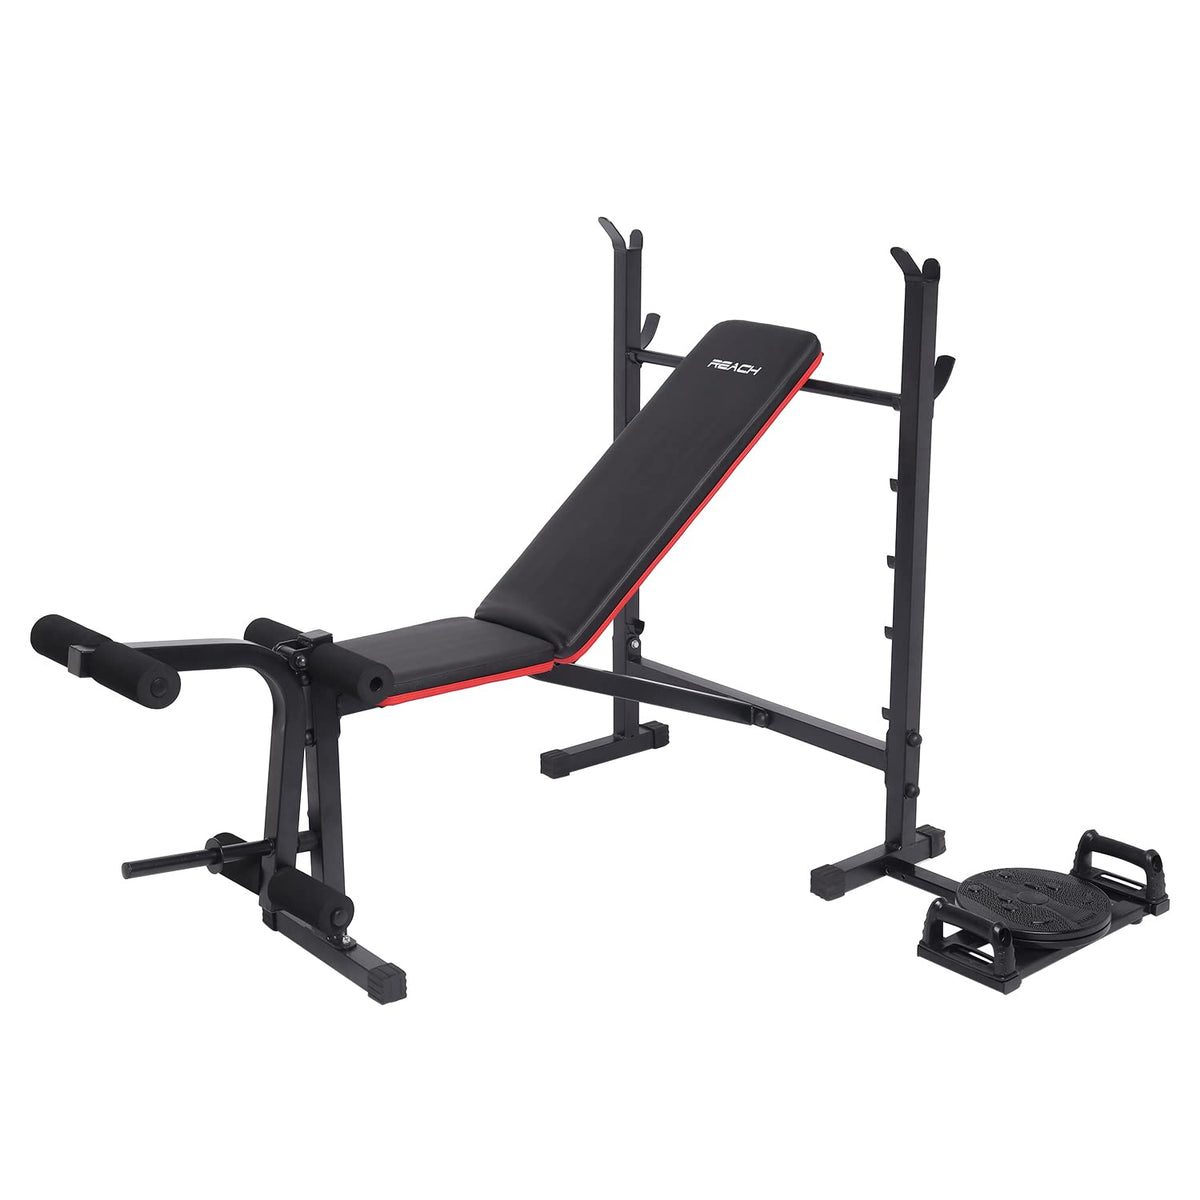 Reach Multifunction 800 Gym Bench | 8 In 1 Multipurpose Home Bench Incline/Decline/Flat | For Strength Training & Full Body Workout | With Push-Up Bar & Tummy Twister | Max User Weight 110Kg